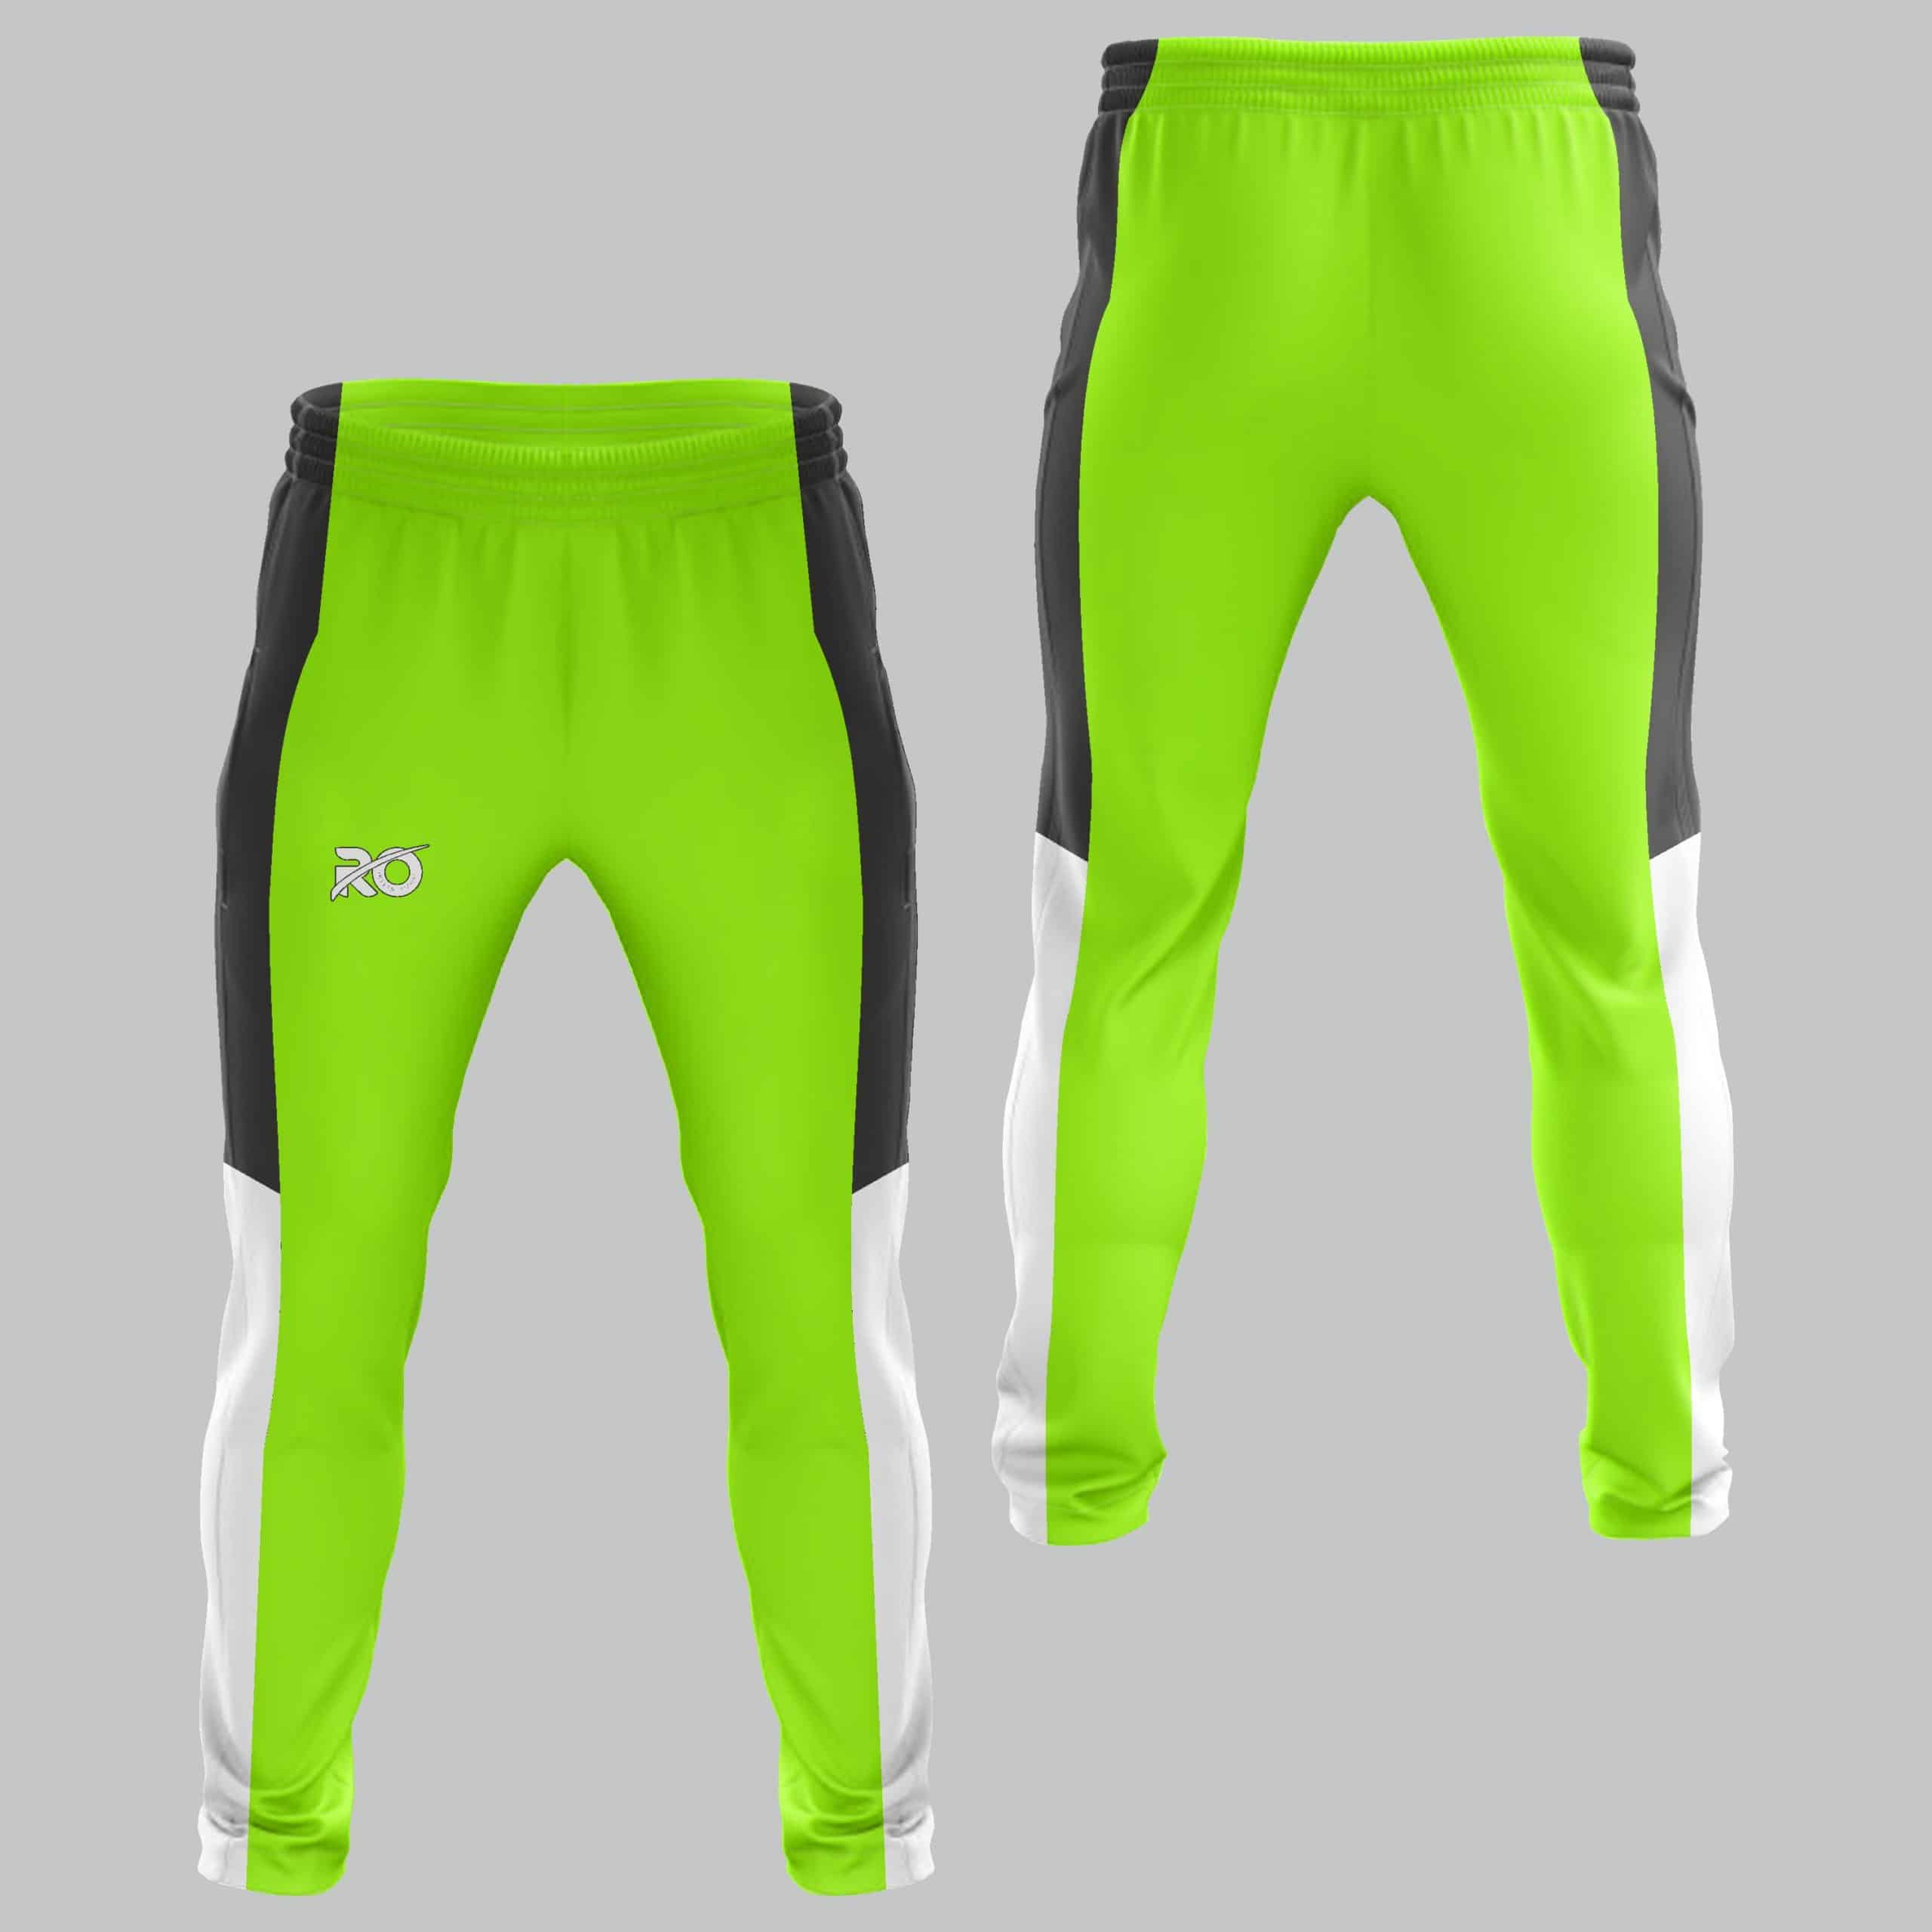 Duooble Pack of 2 Men Solid Blue, Light Green Track Pants at Best Price